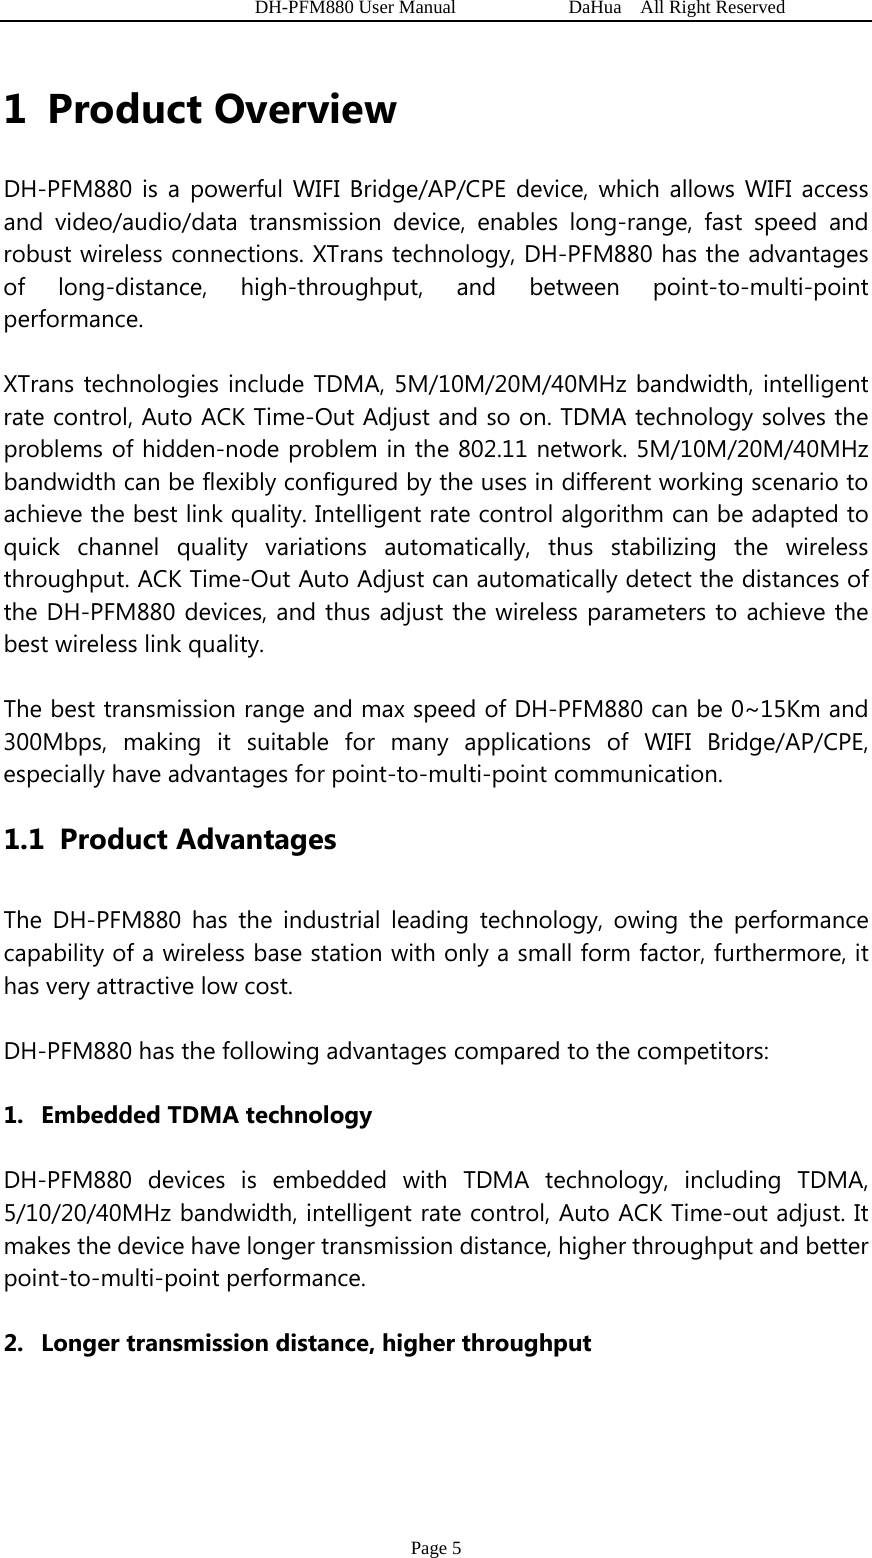   DH-PFM880 User Manual            DaHua  All Right Reserved Page 5 1 Product Overview DH-PFM880 is a powerful WIFI Bridge/AP/CPE device, which allows WIFI access and video/audio/data transmission device, enables long-range, fast speed and robust wireless connections. XTrans technology, DH-PFM880 has the advantages of long-distance, high-throughput, and between point-to-multi-point performance. XTrans technologies include TDMA, 5M/10M/20M/40MHz bandwidth, intelligent rate control, Auto ACK Time-Out Adjust and so on. TDMA technology solves the problems of hidden-node problem in the 802.11 network. 5M/10M/20M/40MHz bandwidth can be flexibly configured by the uses in different working scenario to achieve the best link quality. Intelligent rate control algorithm can be adapted to quick channel quality variations automatically, thus stabilizing the wireless throughput. ACK Time-Out Auto Adjust can automatically detect the distances of the DH-PFM880 devices, and thus adjust the wireless parameters to achieve the best wireless link quality. The best transmission range and max speed of DH-PFM880 can be 0~15Km and 300Mbps, making it suitable for many applications of WIFI Bridge/AP/CPE, especially have advantages for point-to-multi-point communication. 1.1 Product Advantages The DH-PFM880 has the industrial leading technology, owing the performance capability of a wireless base station with only a small form factor, furthermore, it has very attractive low cost. DH-PFM880 has the following advantages compared to the competitors: 1. Embedded TDMA technology DH-PFM880 devices is embedded with TDMA technology, including TDMA, 5/10/20/40MHz bandwidth, intelligent rate control, Auto ACK Time-out adjust. It makes the device have longer transmission distance, higher throughput and better point-to-multi-point performance. 2. Longer transmission distance, higher throughput 